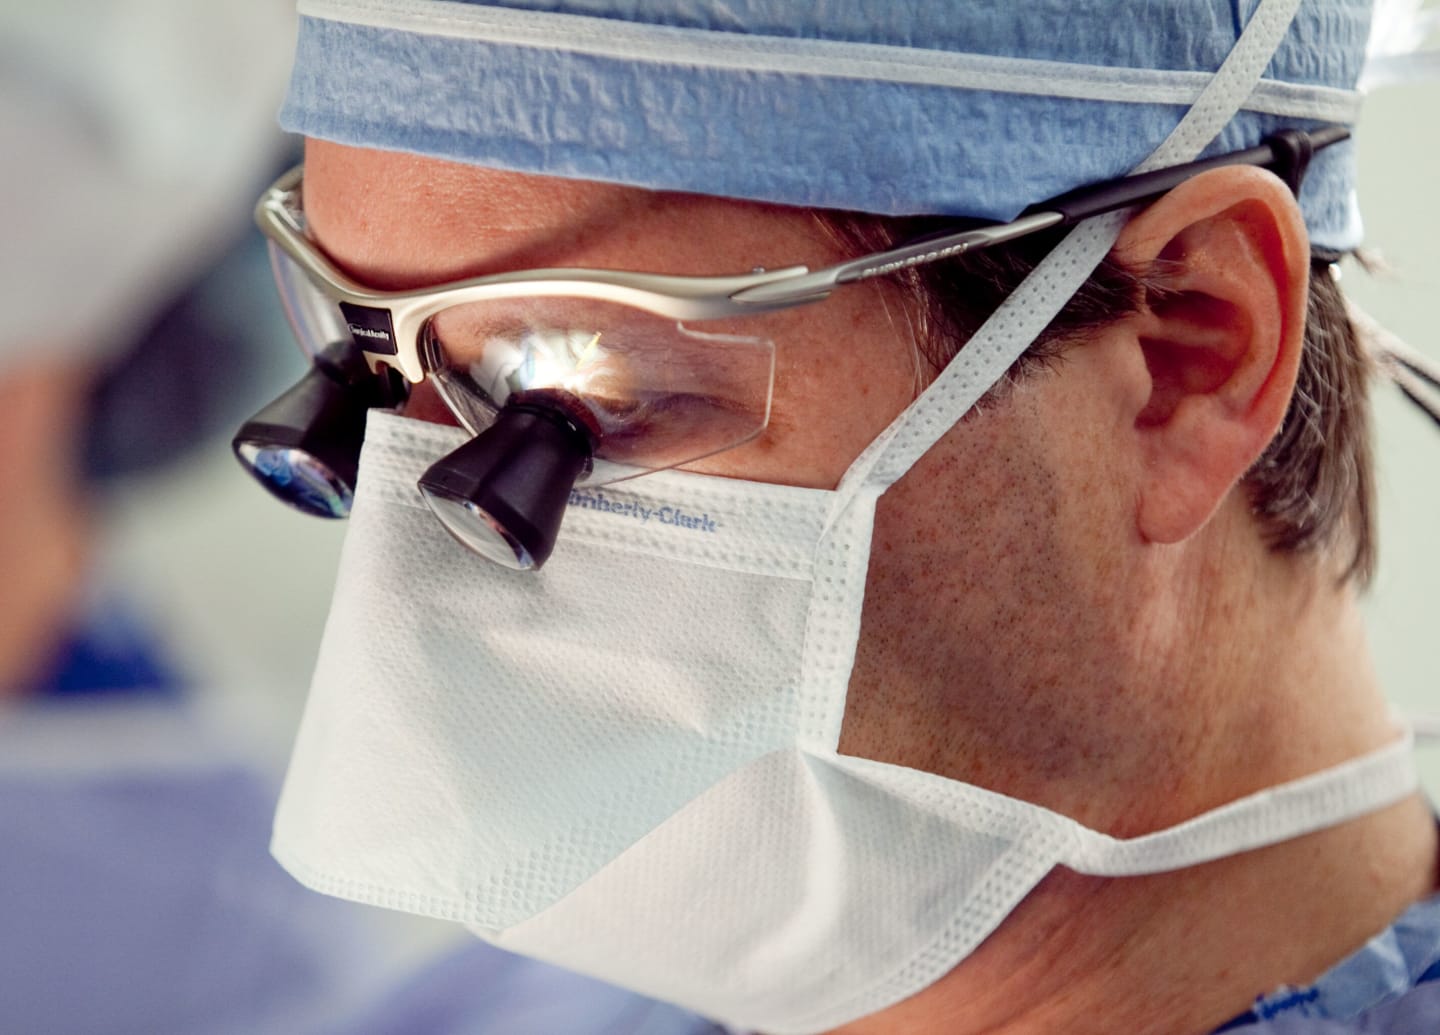 A doctor wearing a mask in an operating room